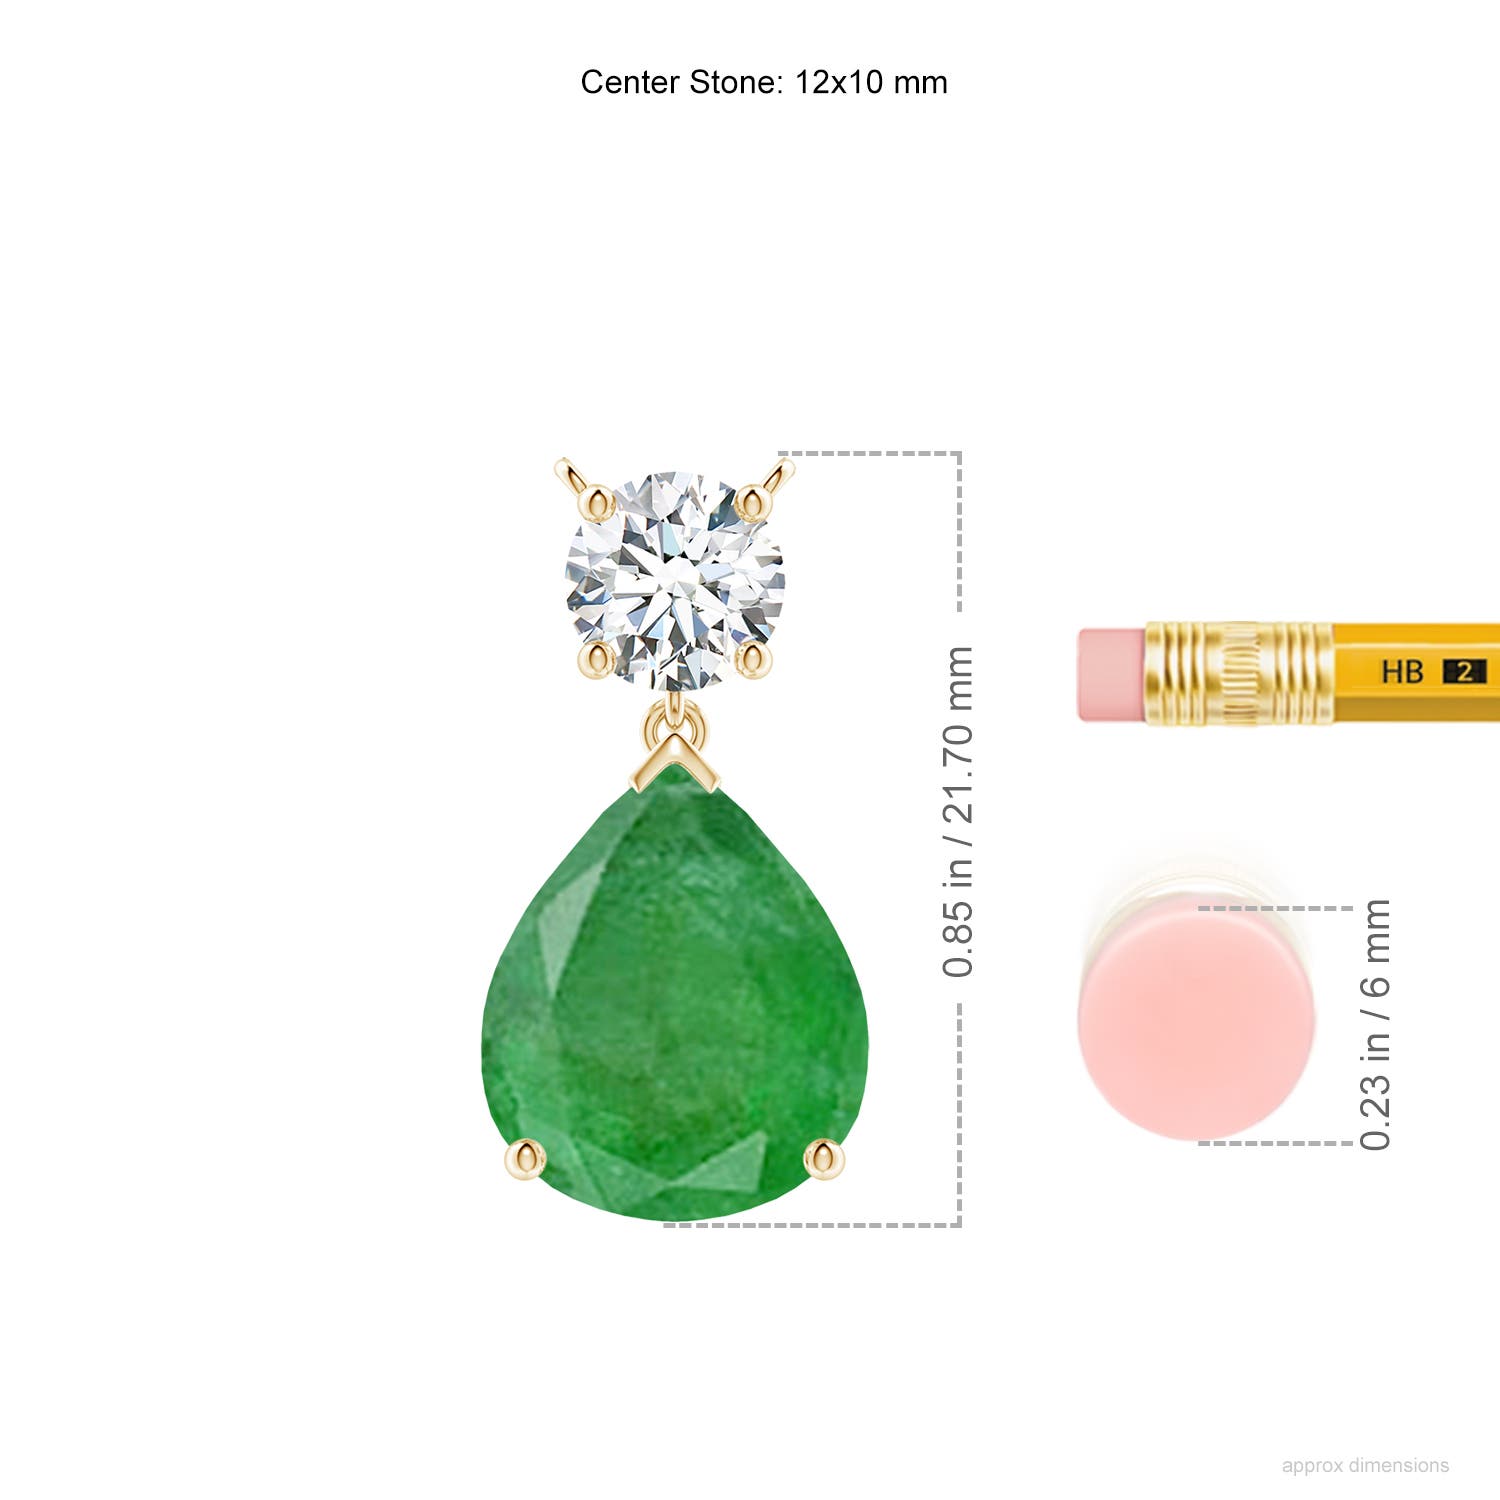 A - Emerald / 5.21 CT / 18 KT Yellow Gold